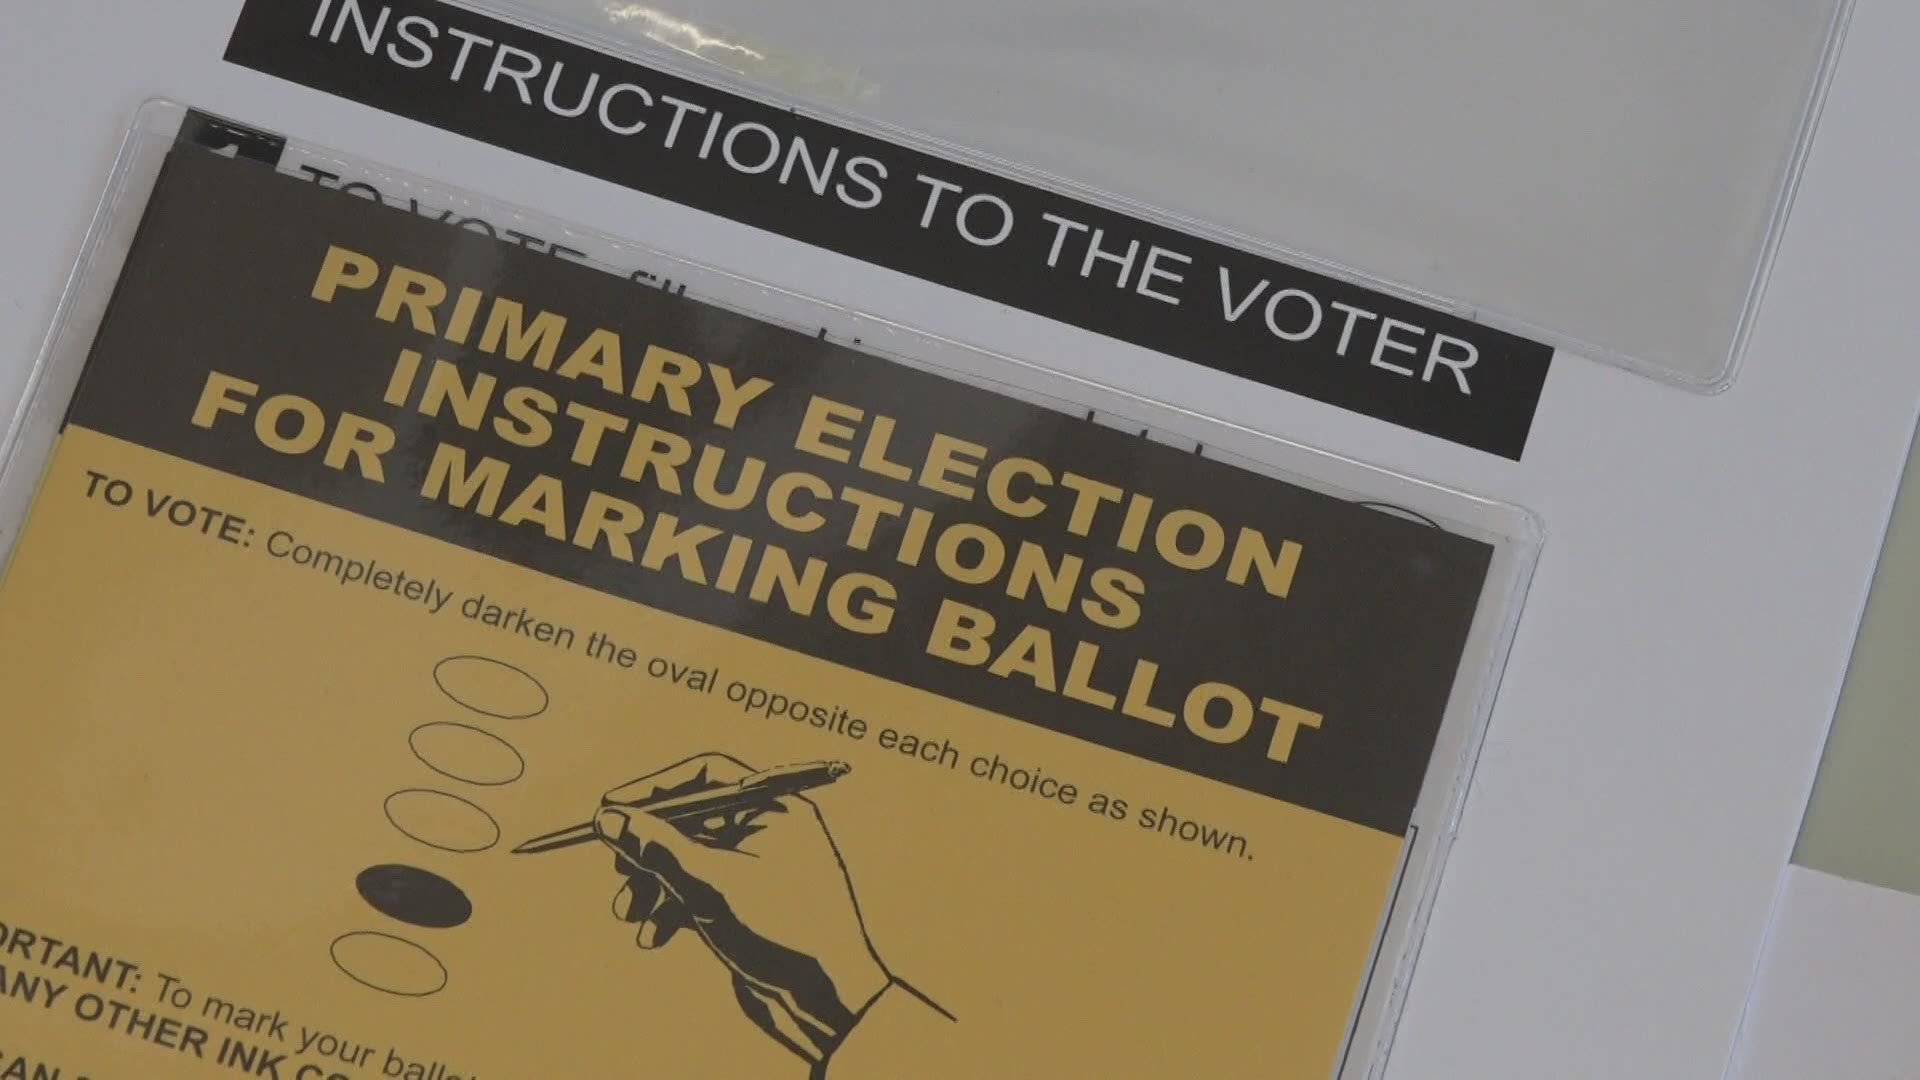 A ballot must be received by 8 p.m. on Election Night to be counted.